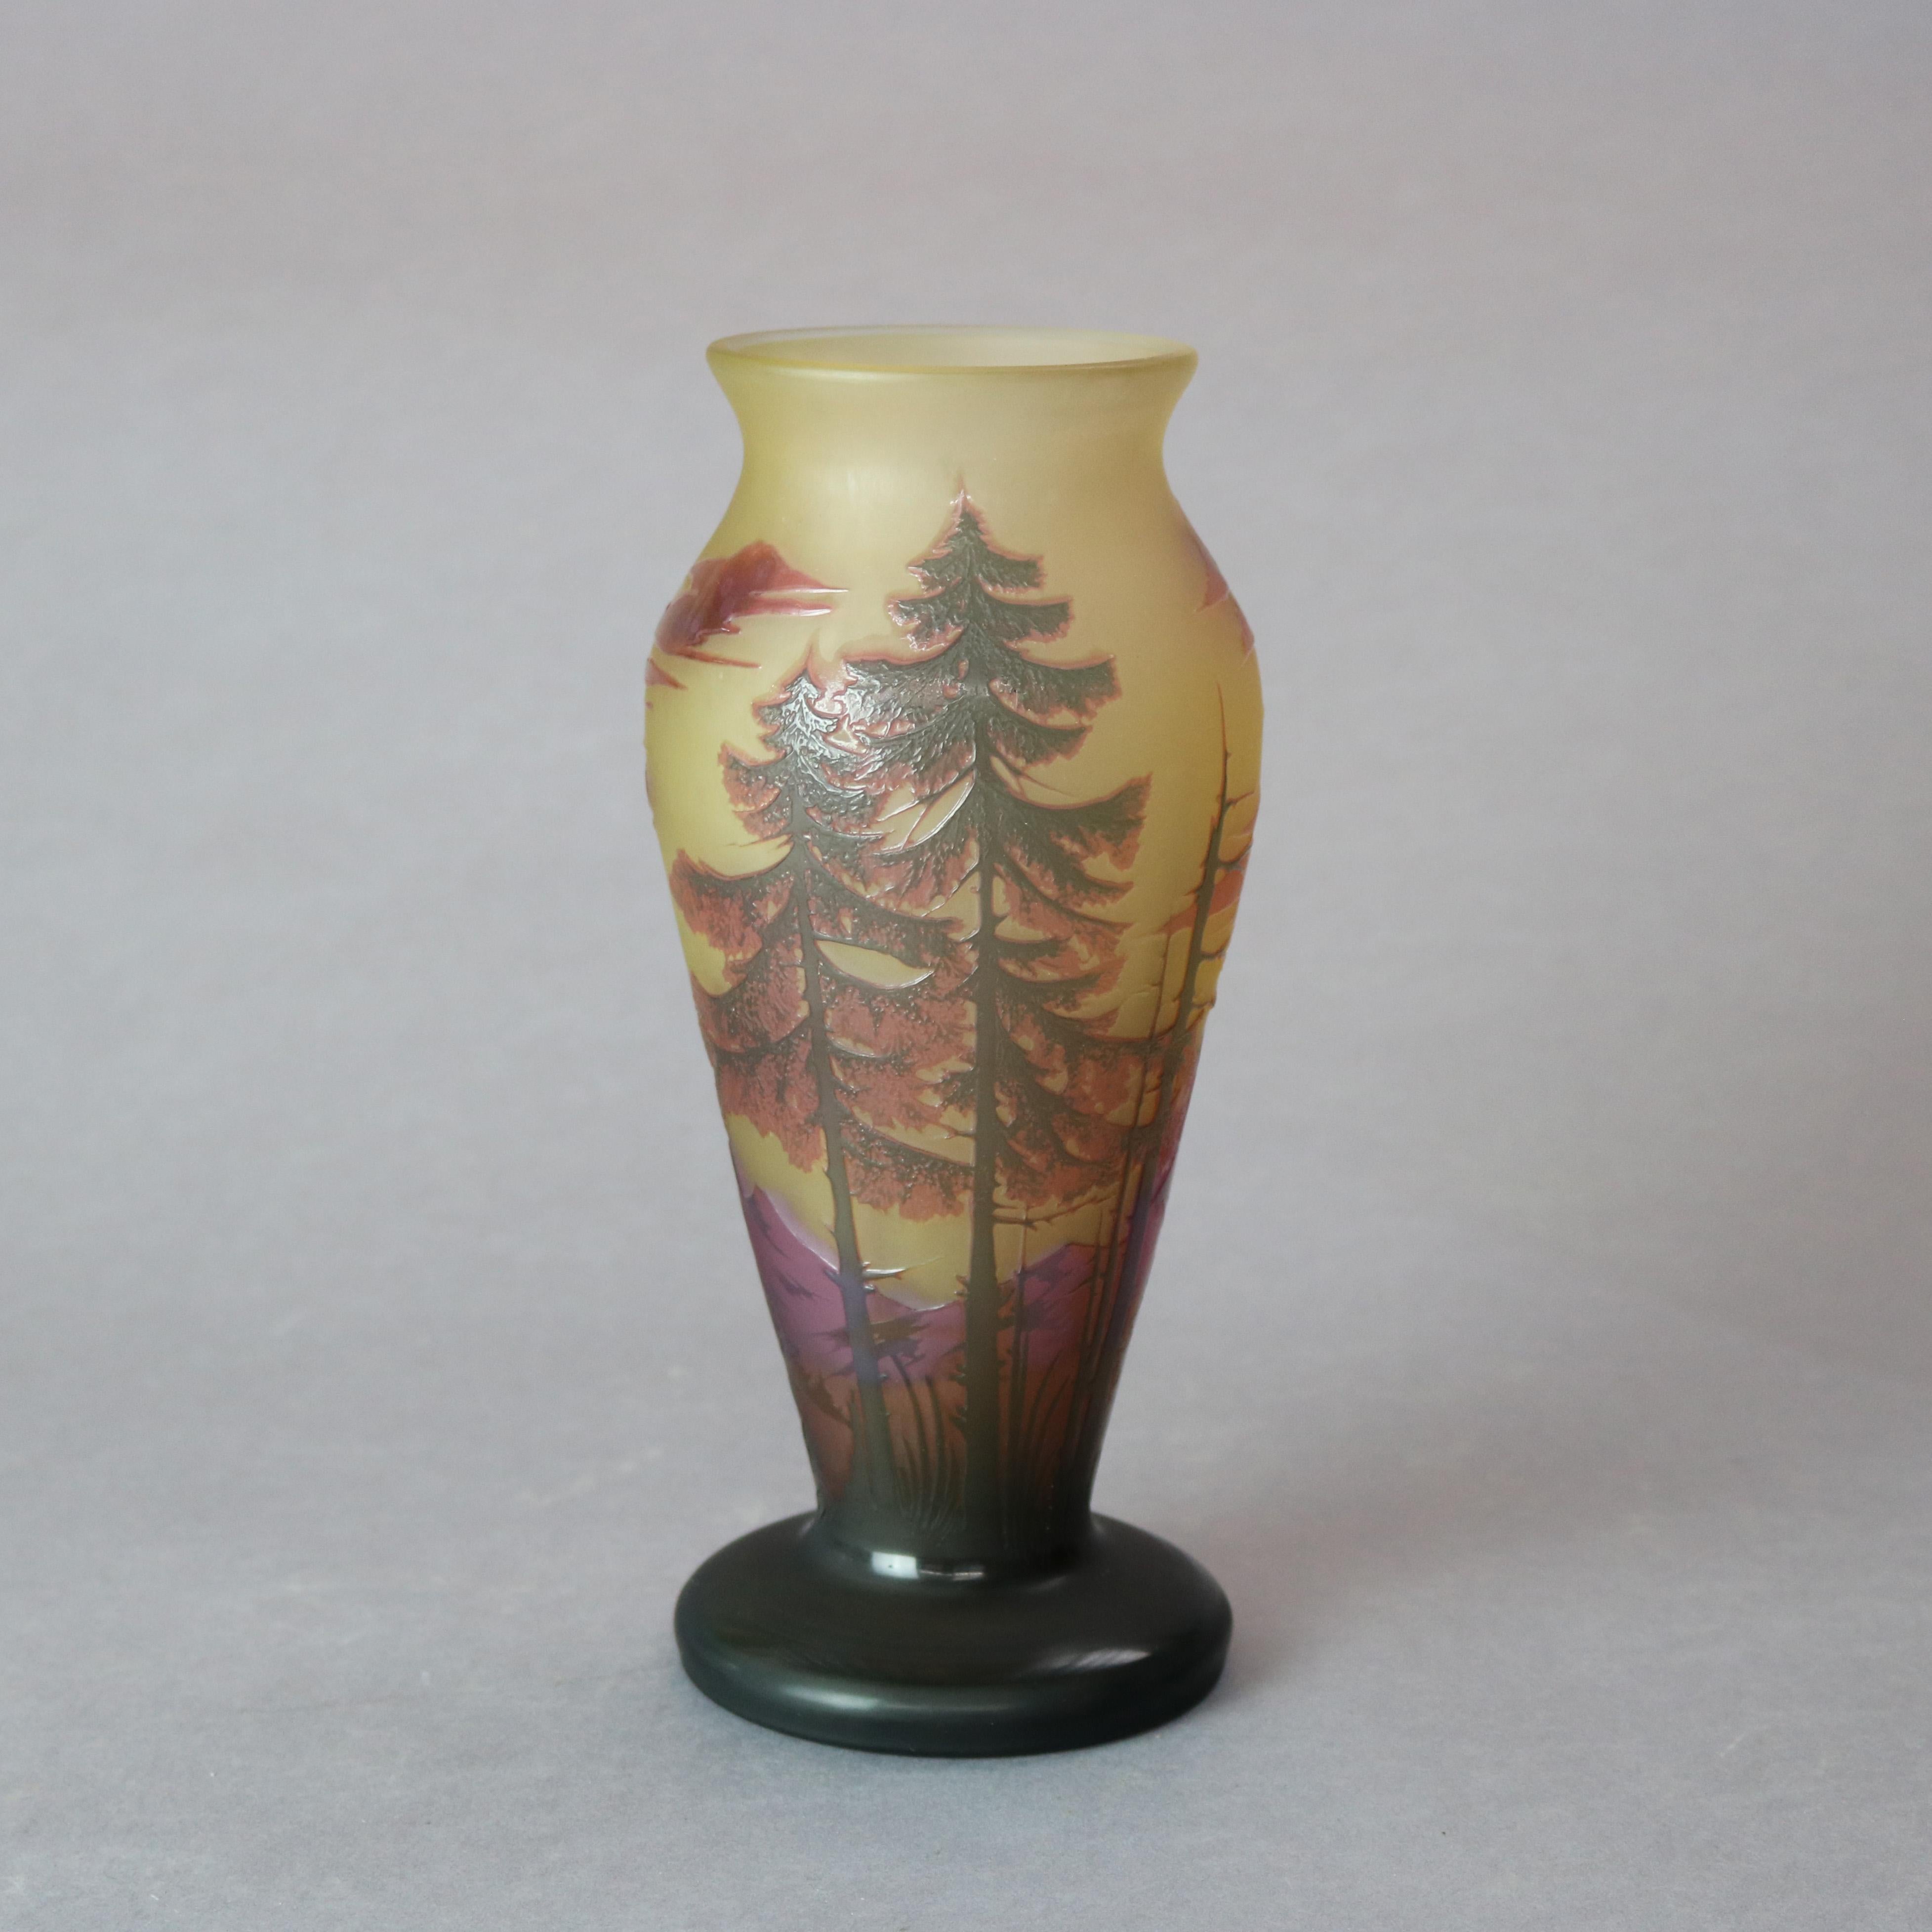 An antique French cameo vase by Dumochelle offers cut-back glass construction having landscape scene with pine trees, signed on base as photographed, circa 1900.

Measures: 9.75